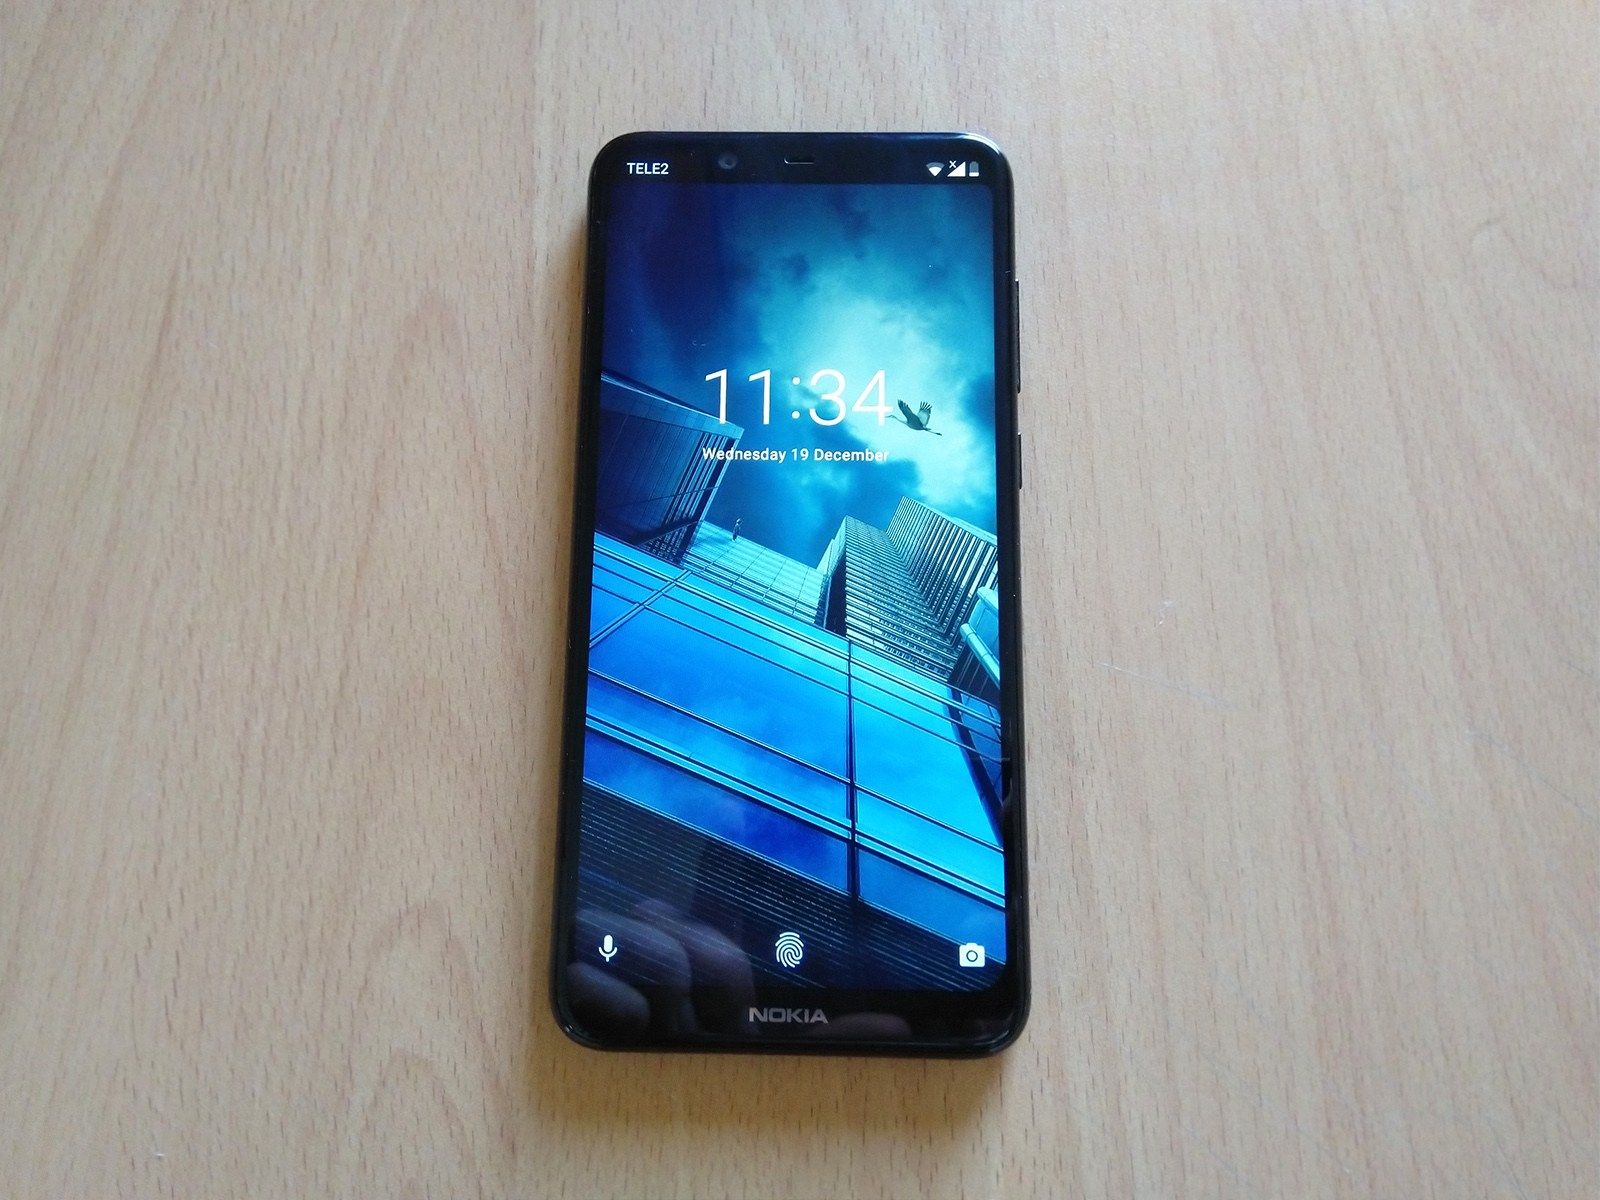 Android 10 rollout started for the Nokia 5.1 Plus